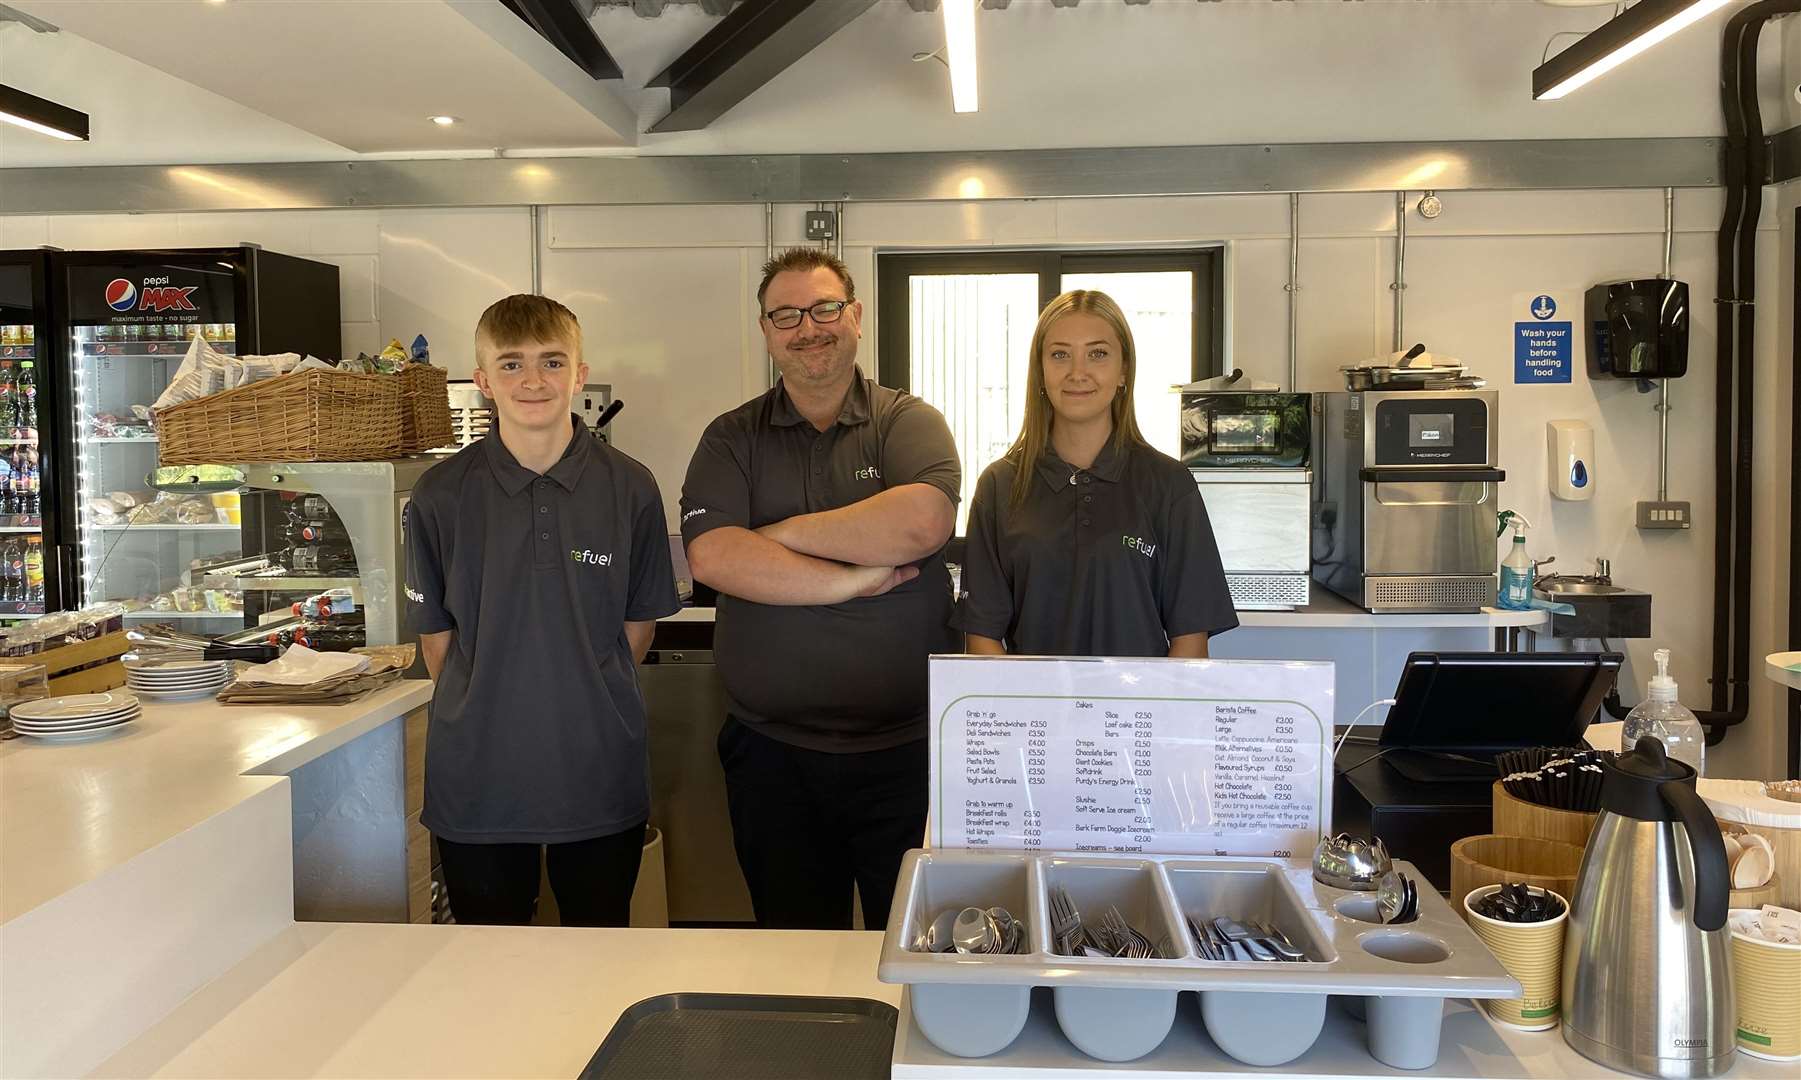 Charlie, Paul and Mea - the team at the new cafe